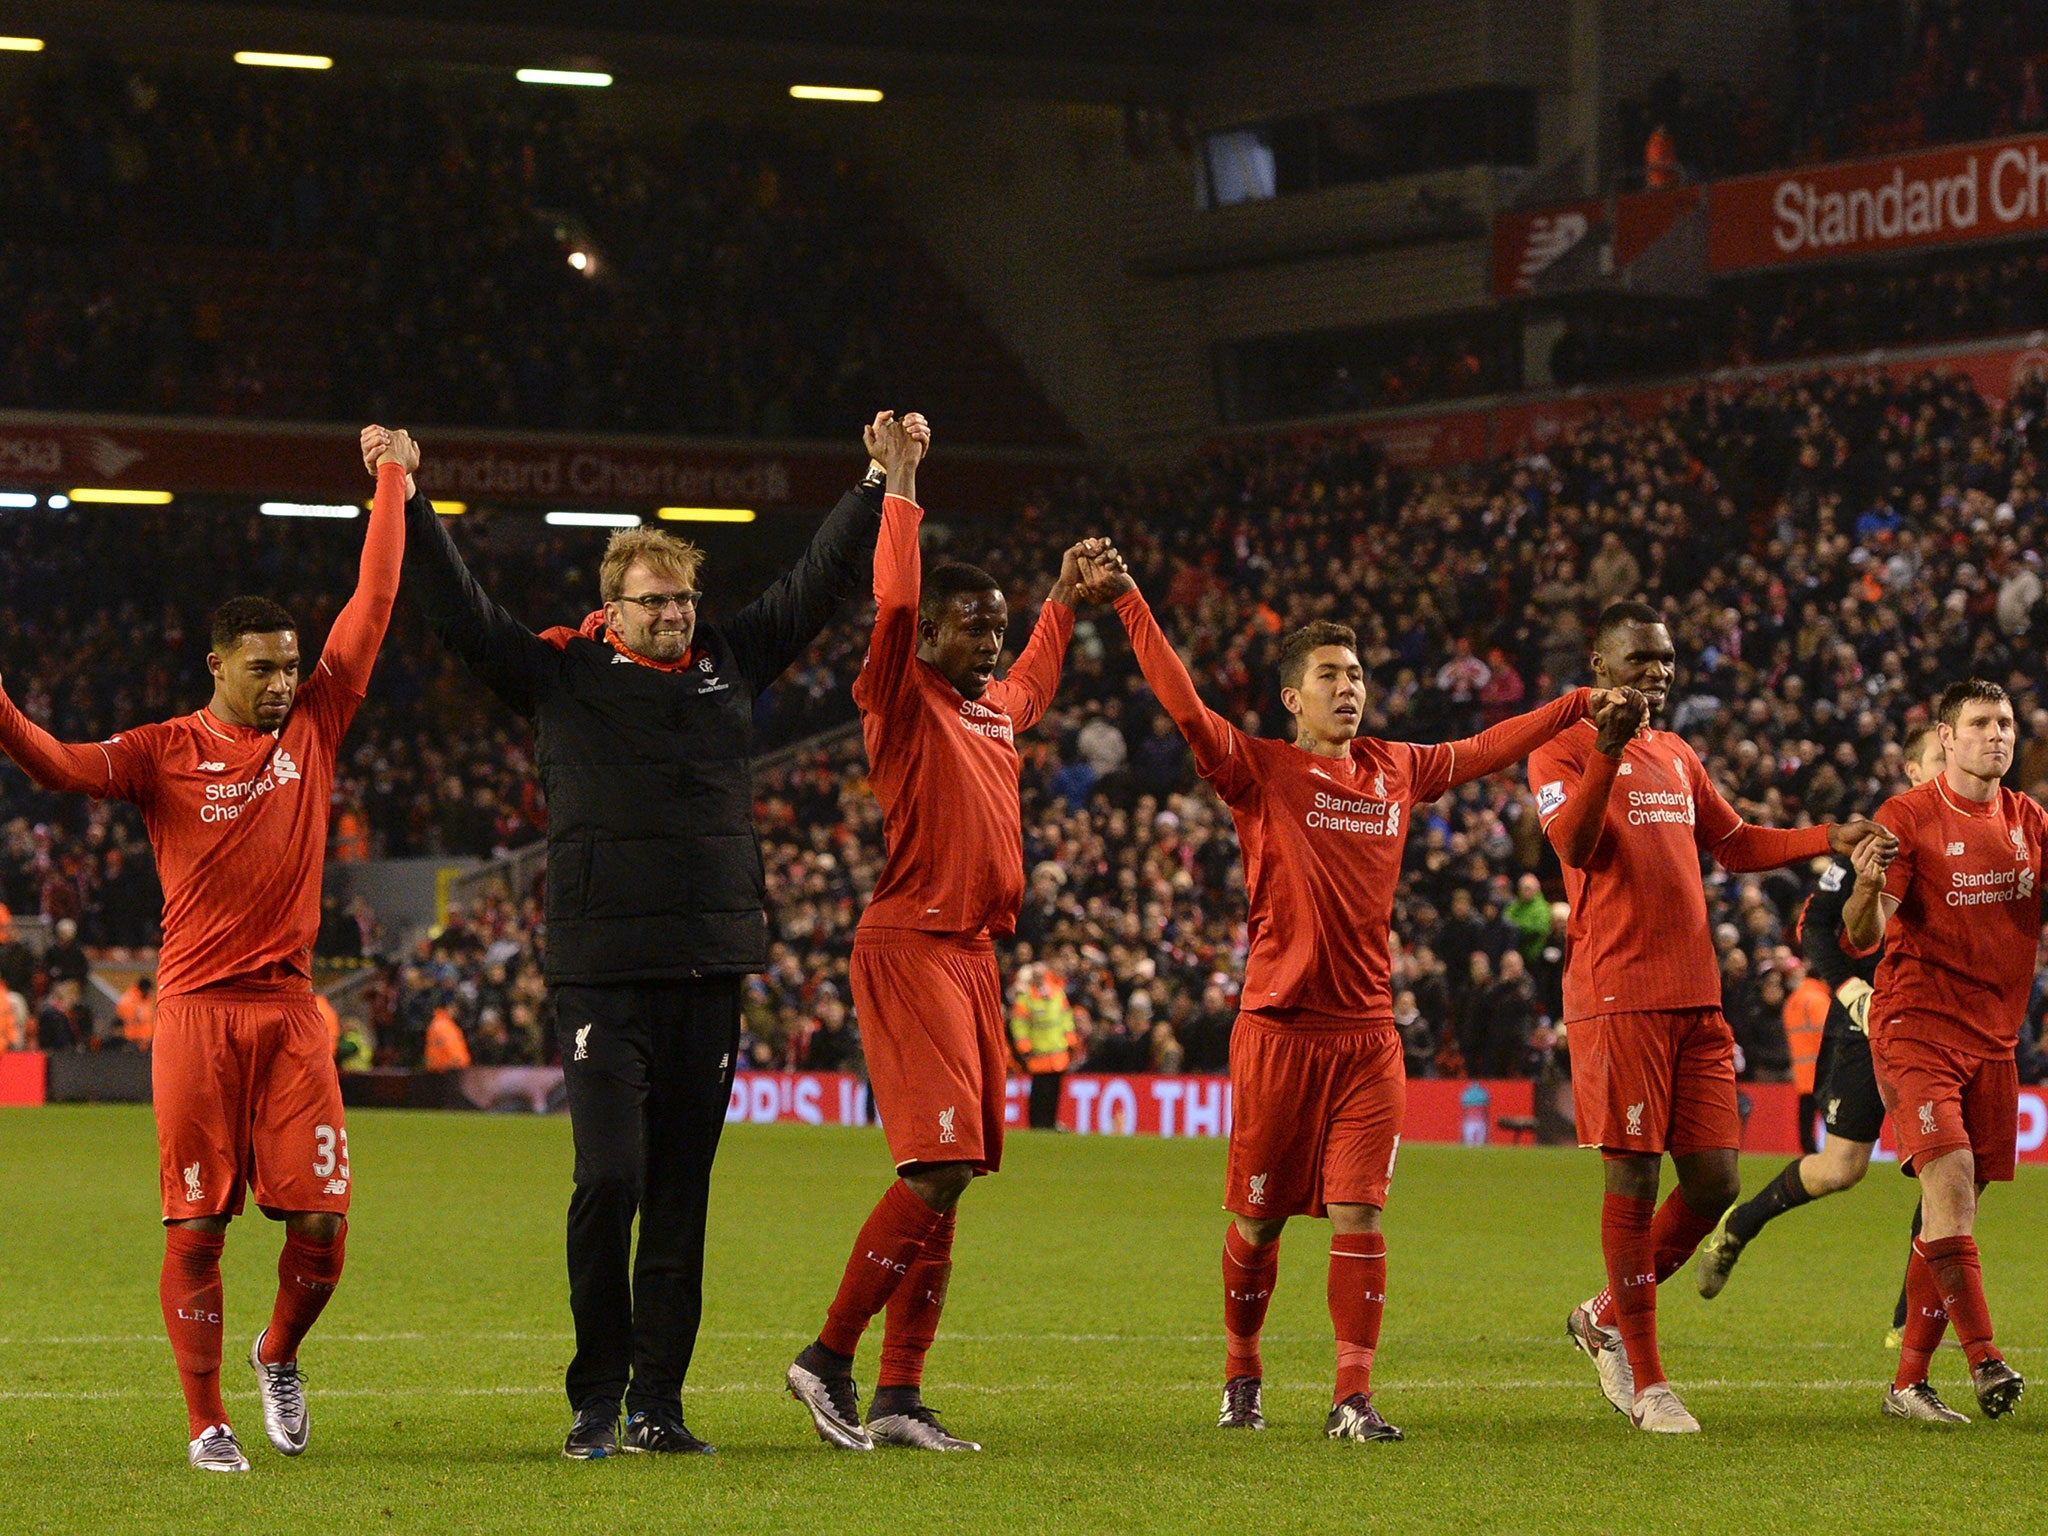 Jurgen Klopp leads his Liverpool side in acknowledging the fans after his side's 2-2 draw with West Brom